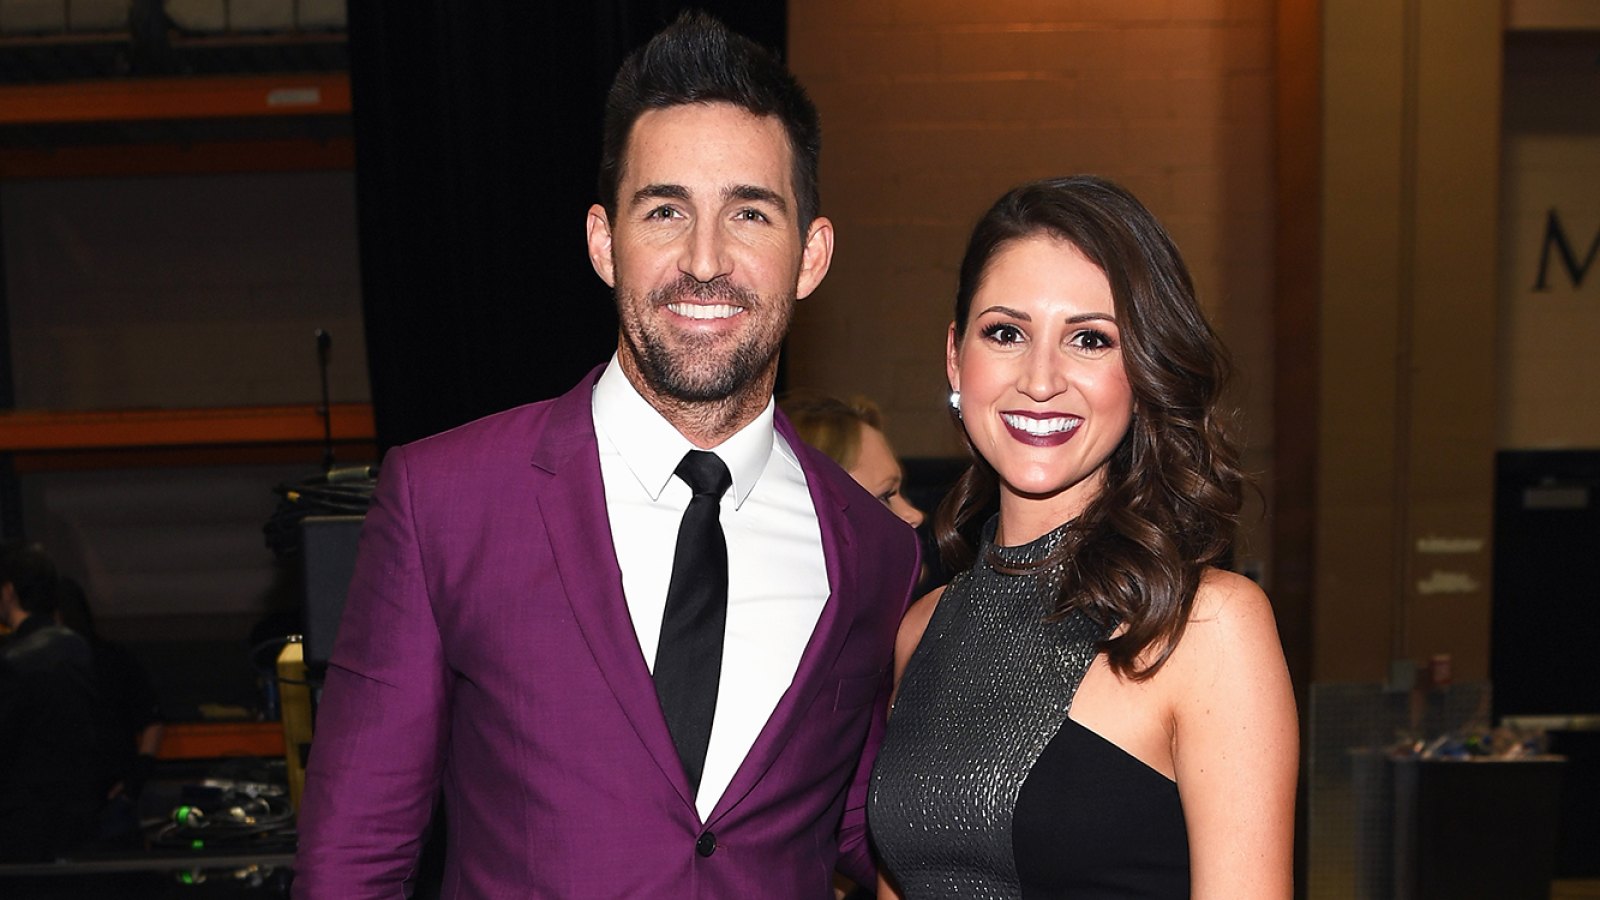 Jake Owen's Girlfriend Erica Hartlein Is Pregnant, Expecting Their First Child Together